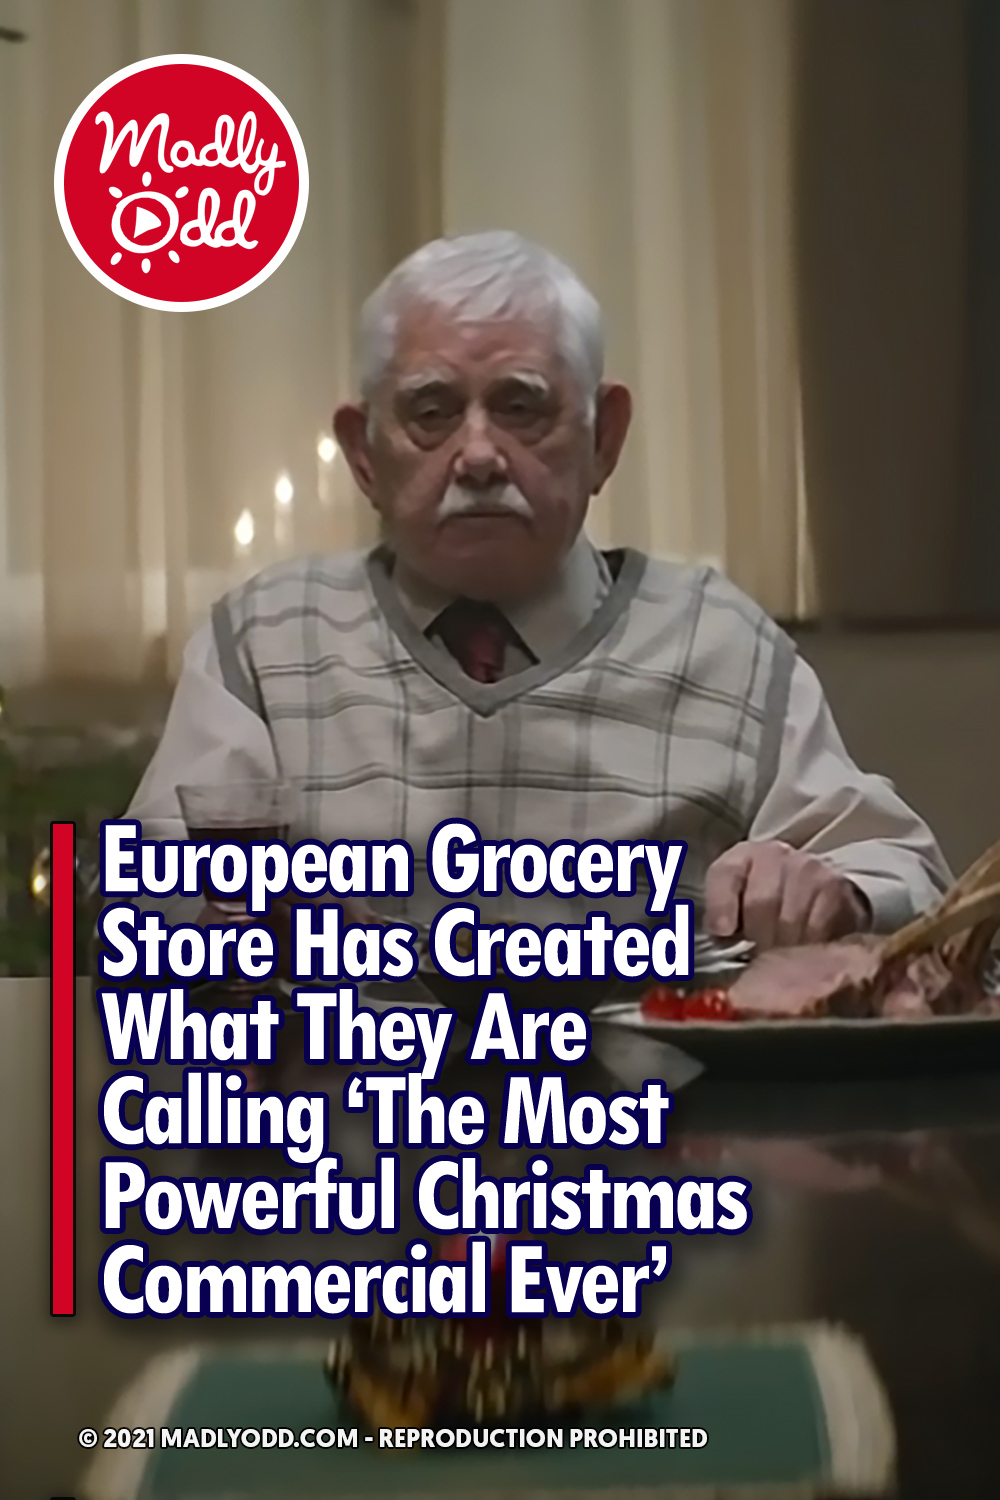 European Grocery Store Has Created What They Are Calling \'The Most Powerful Christmas Commercial Ever\'